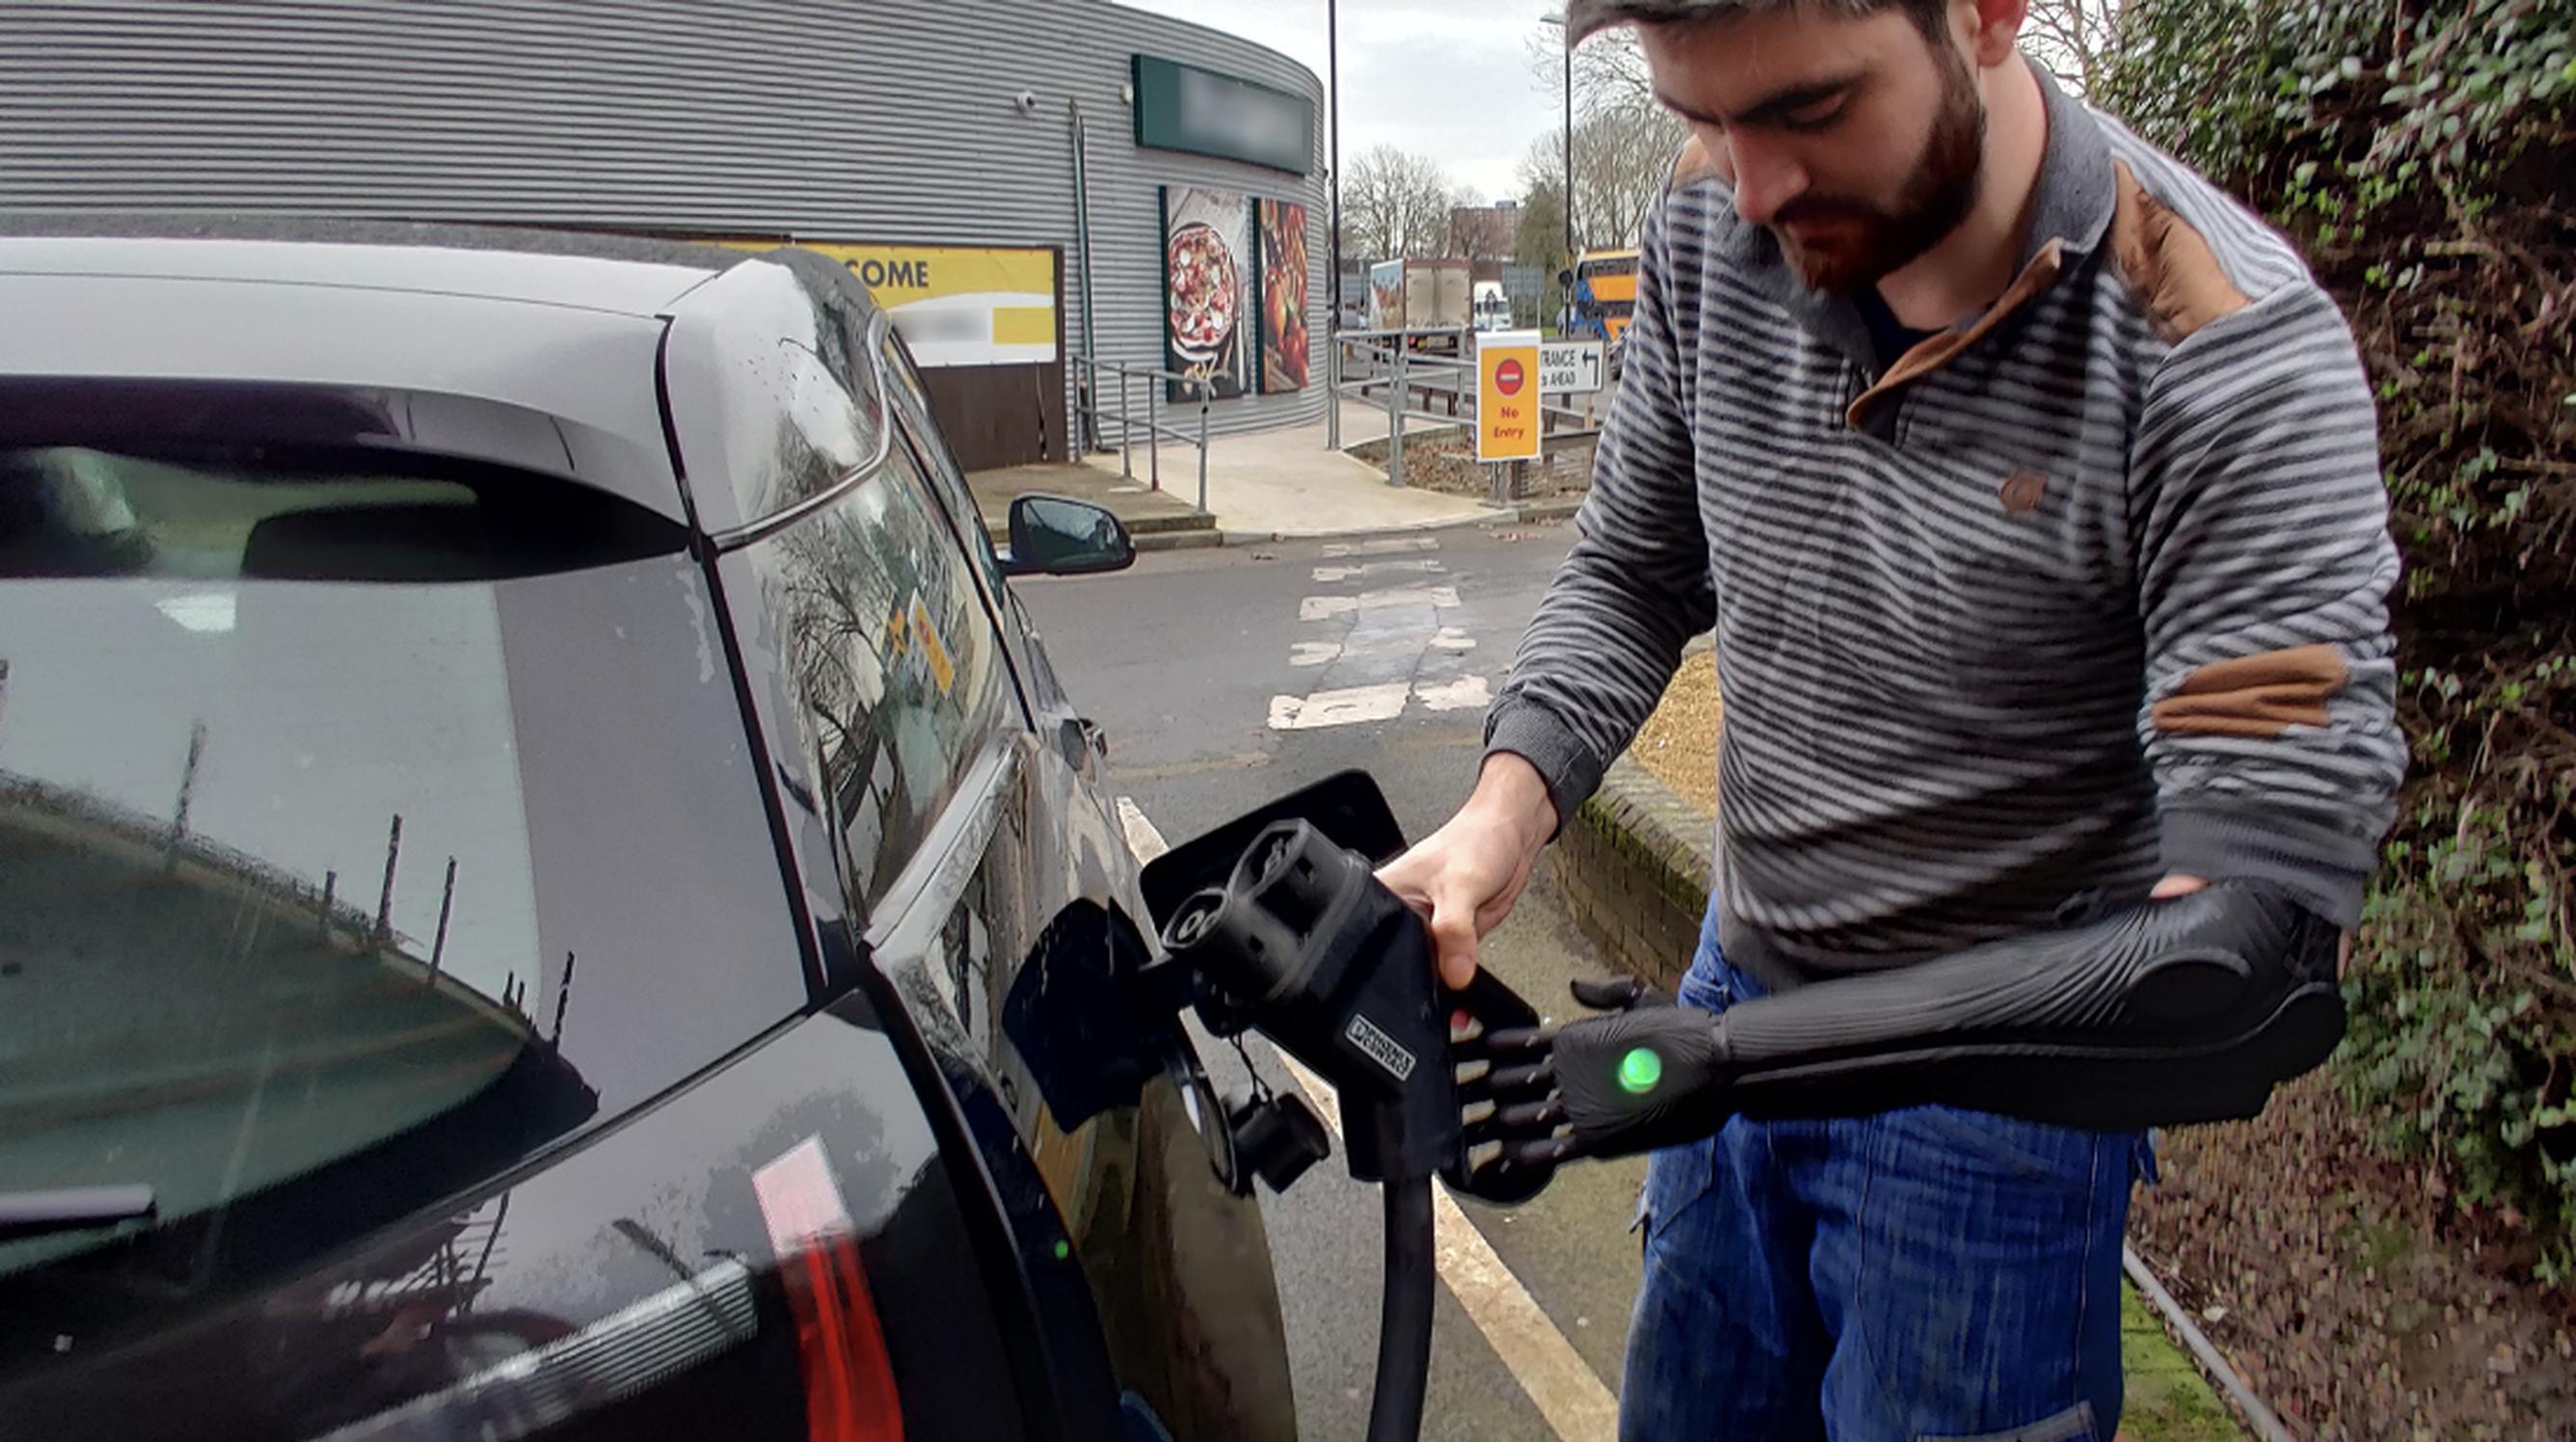 Motability has been calling for more accessible EV charging